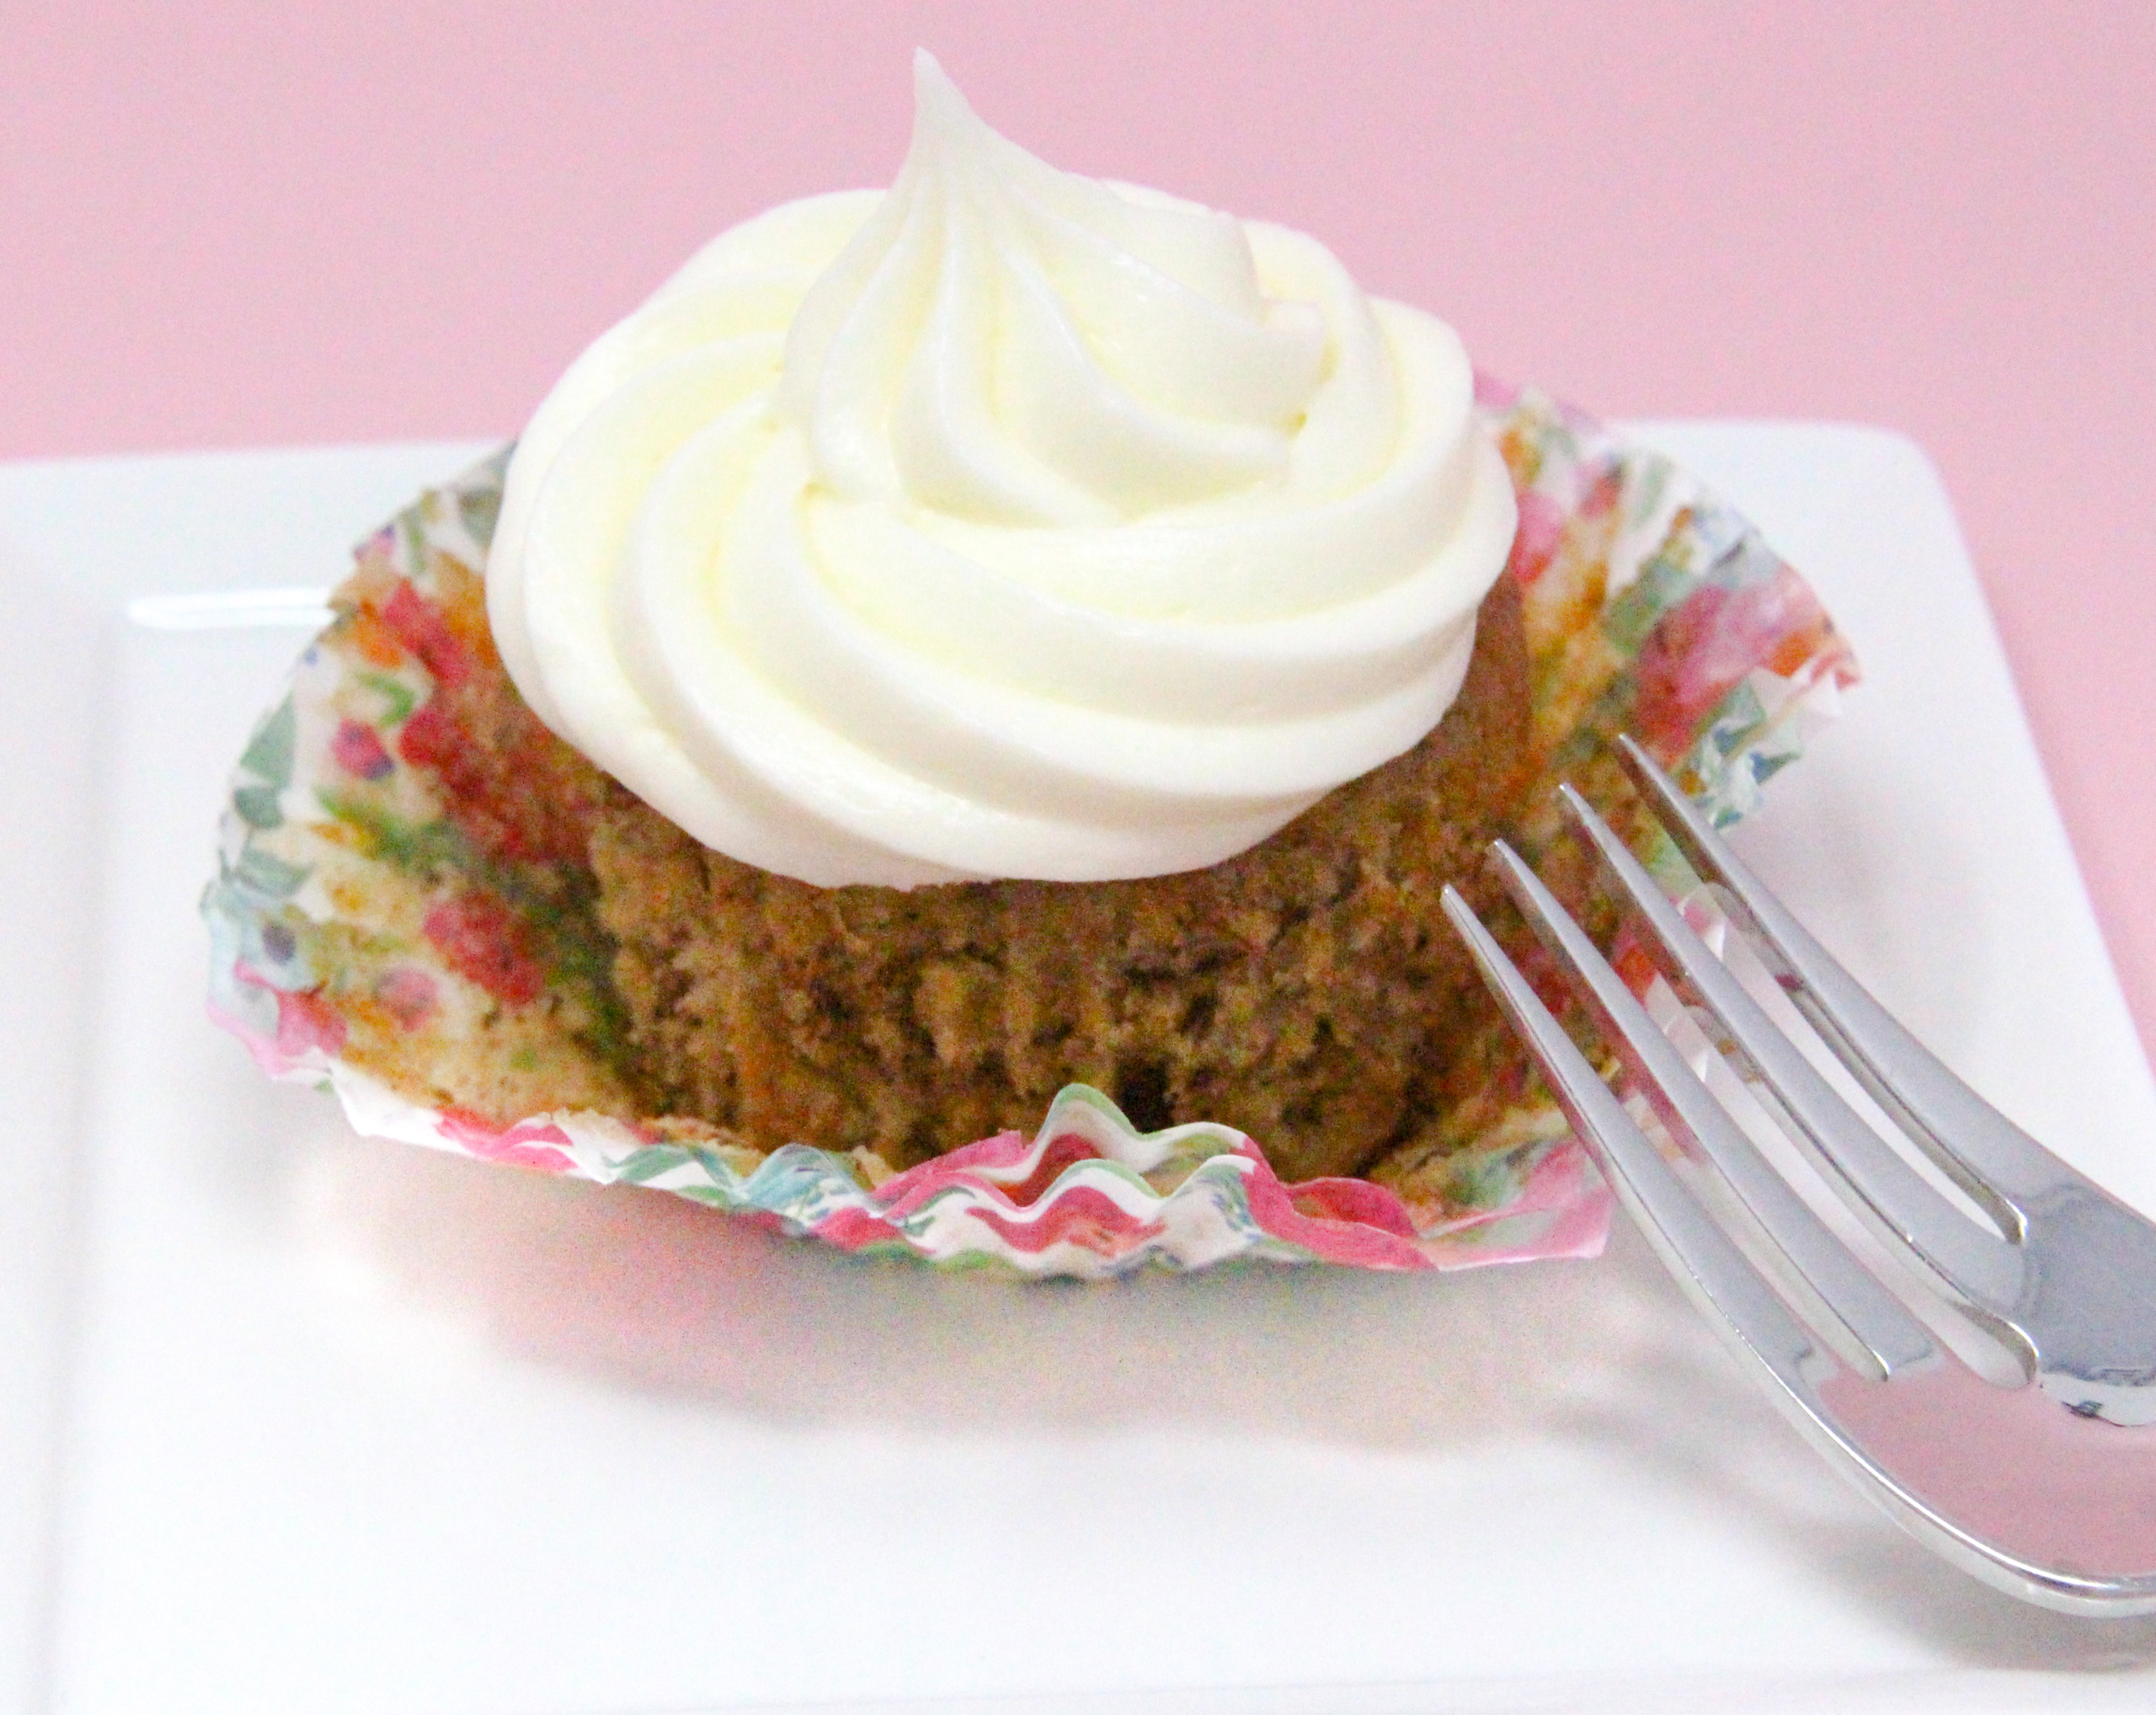 The pineapple and bananas make these Hummingbird Cupcakes extra moist and the pecans add just the right amount of crunch, while the tangy cream cheese frosting is the crowning glory. Recipe shared with permission granted by Jenn McKinlay, author of Strawberried Alive. 